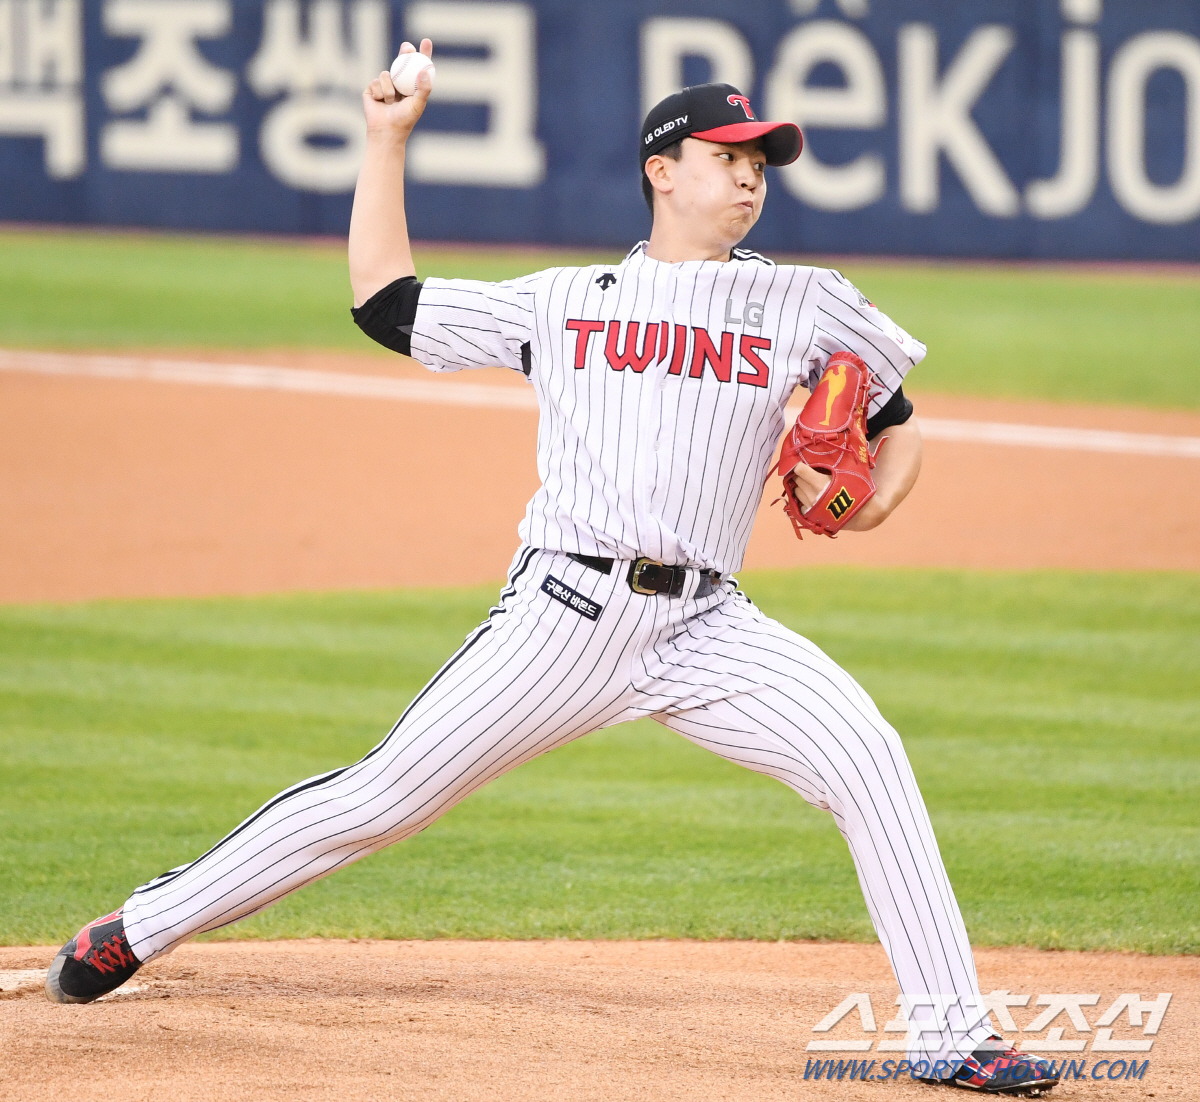 The pitching battles played by the Young Guns are always exciting.The fourth game of the LG Twins and the Samsung Lions Lions in Jamsil-dong on the last two days attracted attention with the first and second year Cole Hamels.It was a return match between rookie LG Lee Min-ho (19) and second-year Samsung Lions Won Tae-in (20) this year; both pitchers threw seven innings to give them a luxury pitching game.It was a pity that I would have liked to have a full audience.Lee Min-ho won when he met in Daegu on the 21st of last month, and Won Tae-in, who had a scoreless run, won the game.Young pitchers have an invisible rivalry: Won Tae-in said after Kyonggi, Minho threw really well, it was bad in the first inning, but I was stimulated by dragging it to the seventh inning.I did not want to lose today, he said. I want to stop now, he said when asked if he was waiting for a third confrontation.Of course, this competitive stress is a great nourishment for the young people to grow.In 2020, the KBO League is making a rich story by announcing the birth of talented young people.Managers and club officials are saying, It is a lumber to lead our team for more than 10 years.The KBO mound, which waited for a young Ace to succeed Ryu Hyun-jin, Kim Kwang-hyun, and Yang Hyun-jong, is full of vitality with their appearance.In the early 20s, native starters are making a competitive composition with foreign pitchers in each sector.The front runner is NC Dynos left-hander Koo Chang-mo (23).Koo Chang-mo is in the lead of three major divisions with four wins in 5Kyonggi, an Earned run average of 0.51, and 38 strikeouts.He has grown into a left-handed Ace representing KBO, and he has put the necessary conditions on Cole Hamels, including a fast ball of 150km, stable control, and bold Kyonggi operation.Koo Chang-mo is actually a prepared Ace who has steadily accumulated selection classes since his debut in Group 1 in 2016.Won Tae-in is the one who emerged as a competitor of Koo Chang-mo.He has recently achieved a 3Kyonggi series of Quality Start + with four fastballs, sliders, changeups, and curves in the late 140km range. He marked the Earned run average 2.45 and jumped to third place in this category.Won Tae-in joined last year after receiving his first term and has already earned a starting experience at 20Kyonggi, a position he has grown to contend for the teams Ace spot in two years of joining.Won Tae-in said, It is because of the active game that we can throw the innings long.Last year, I did not have a decision while playing a pitch, but this year I have been throwing confidently without avoiding the count or the ball count from the beginning. Won Tae-ins team senior, left-hander Choi Chae-heung, 25, is also in the running, with 3-1 in 5Kyonggi and 3.21 in Earned run average this season.After joining the team after receiving his first term in 2018, he started in 15Kyonggi last year and has been caught up in the game.140km in the early and mid-term, and all kinds of fastballs, change-ups, sliders, and curves are freely used according to the thorough corner work.On the 31st of last month, NC was the first to lose the season with nine hits and seven runs in four innings, but it would have been a drug.Seo Joon-won (20) also has a stable position in the rotation with a 2-1 loss and an Earned run average 4.23 in 5Kyonggi as the side arm of the Lotte Giants second year.With fastballs up to 150 kilometers, the team has recently recorded 2Kyonggi consecutive quality starts; the Kia Tigers Lee Min Woo (27) is also a notable lumber.Lee Min Woo, who joined Kyungsung University in 2015 as the first name after graduating from Kyungsung University, played mainly bullpen pitcher until last year and won the first place this year.5 in Kyonggi with three wins, and Earned run average 3.23 in the mark.Among the rookies who joined this year, KT Wiz So-Jun (19) is attracting attention besides Lee Min-ho. Although So-Jun has recently gained a run-off rate, Lee Kang-cheols evaluation is very positive.A variety of ball combinations that combine calm personality, four-shim and two-shim are considered strengths.